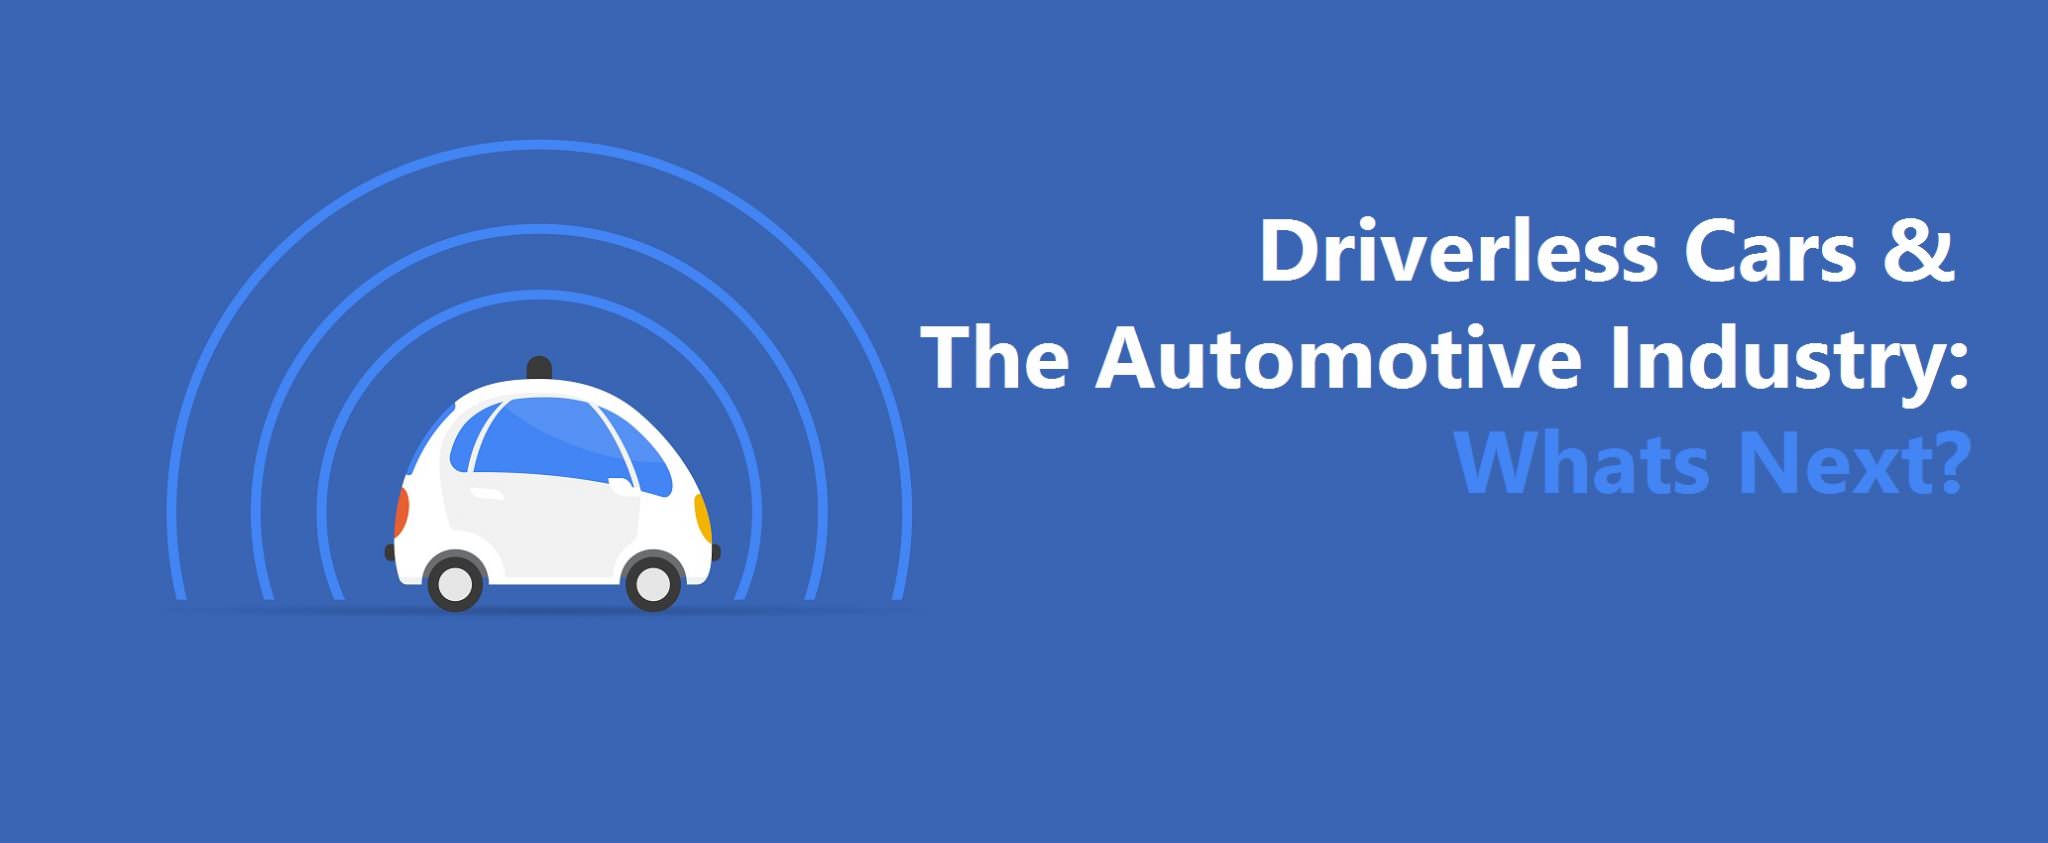 Driverless cars automotive industry title